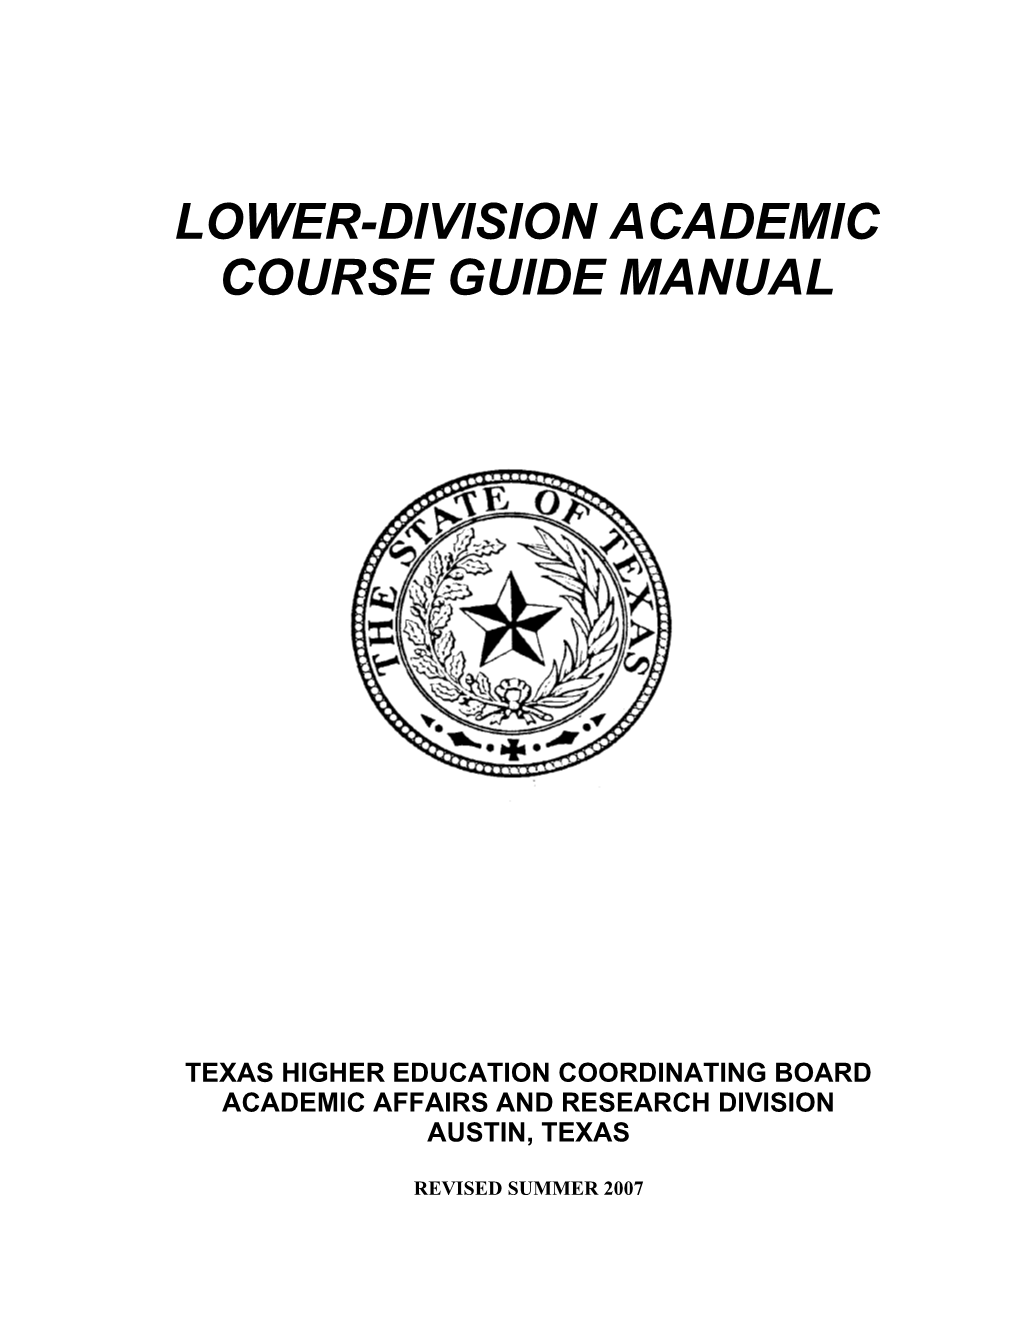 Lower-Division Academic Course Guide Manual